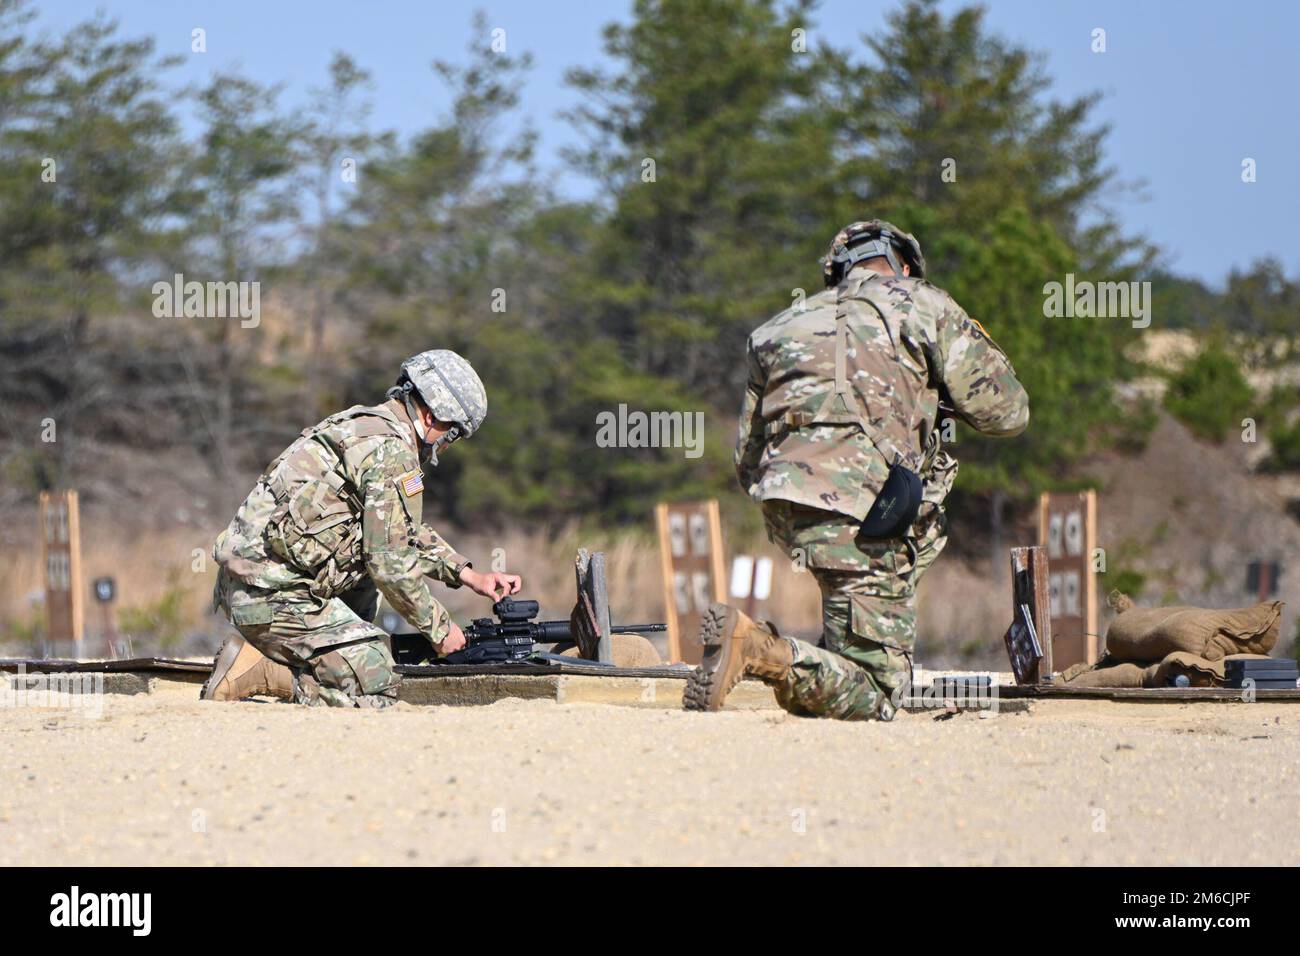 The solders are from Maryland and the D.C. area, 151st LOD (Legal Operations Detachment). They are on Range 28A on the Fort Dix Range Complex during  range training for M16A1. The object is to train and test soldiers on the skills necessary to detect, identify, engage and defeat stationary personnel targets in a tactical array. The secondary purpose is to provide realistic and effective marksmanship training. (Photos taken by the Fort Dix [TSC] Training Support Center) Stock Photo